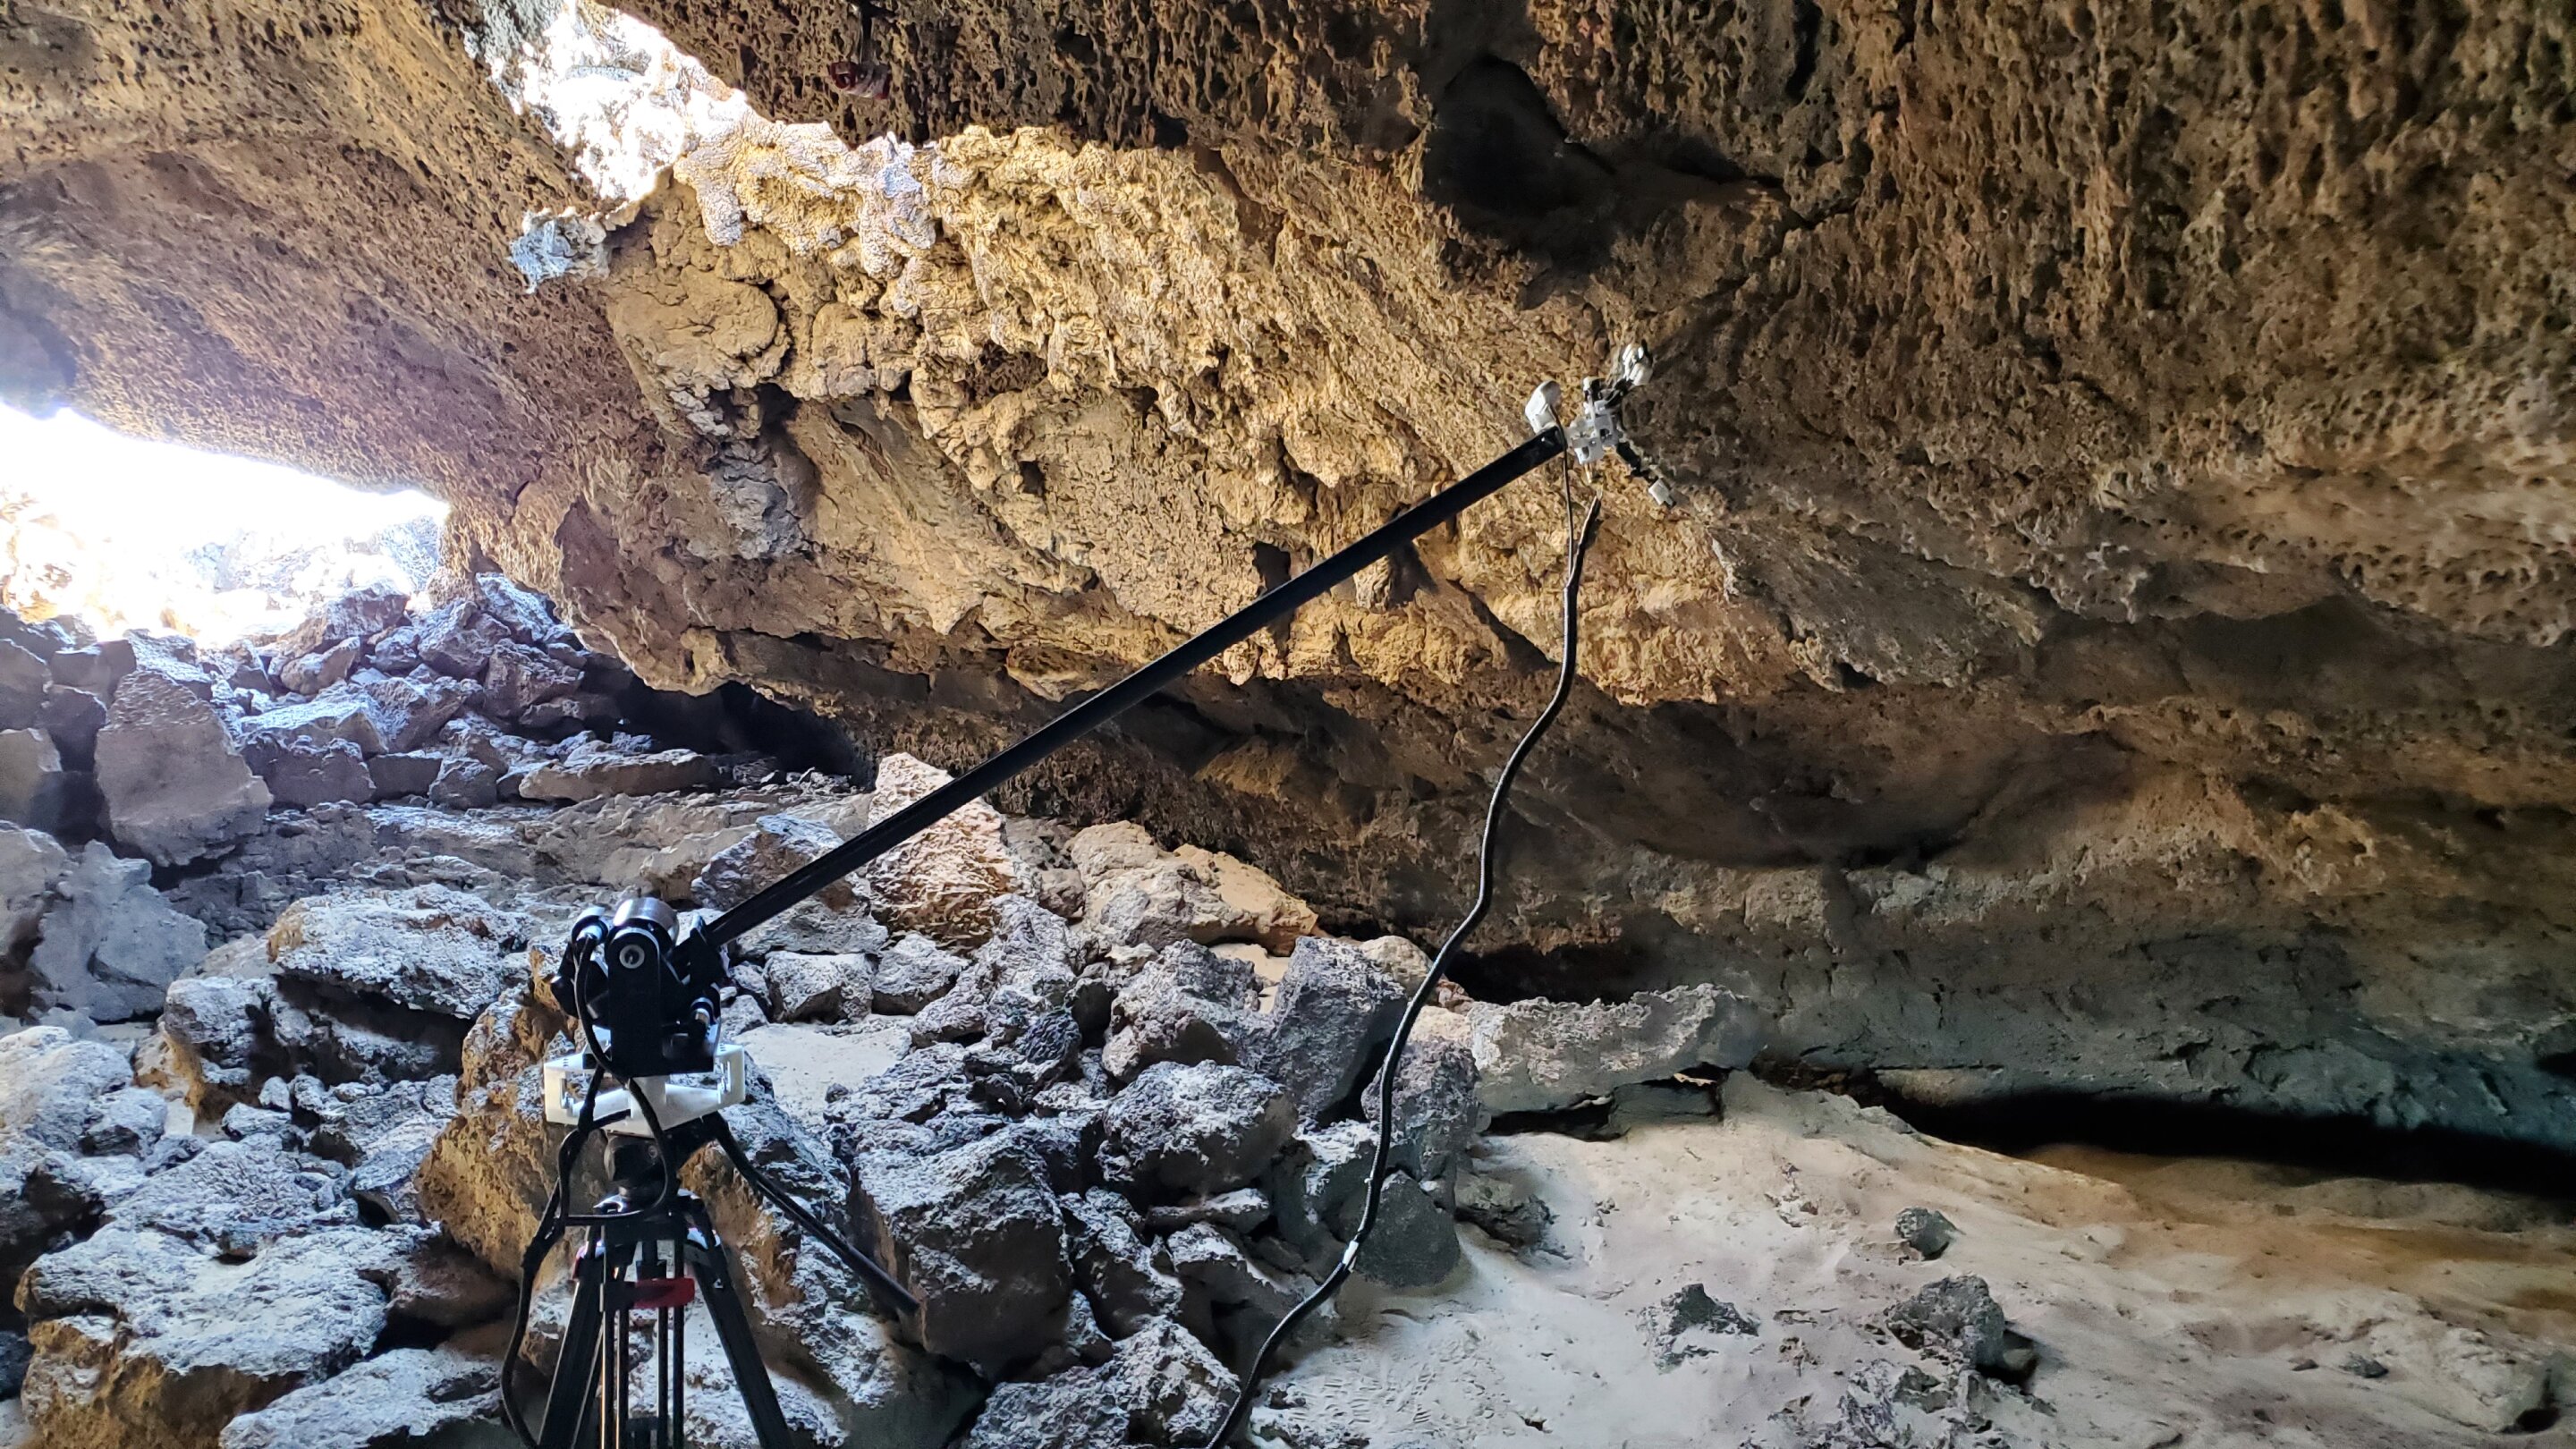 Engineers design spider-like robot that may be used to explore caves on Mars